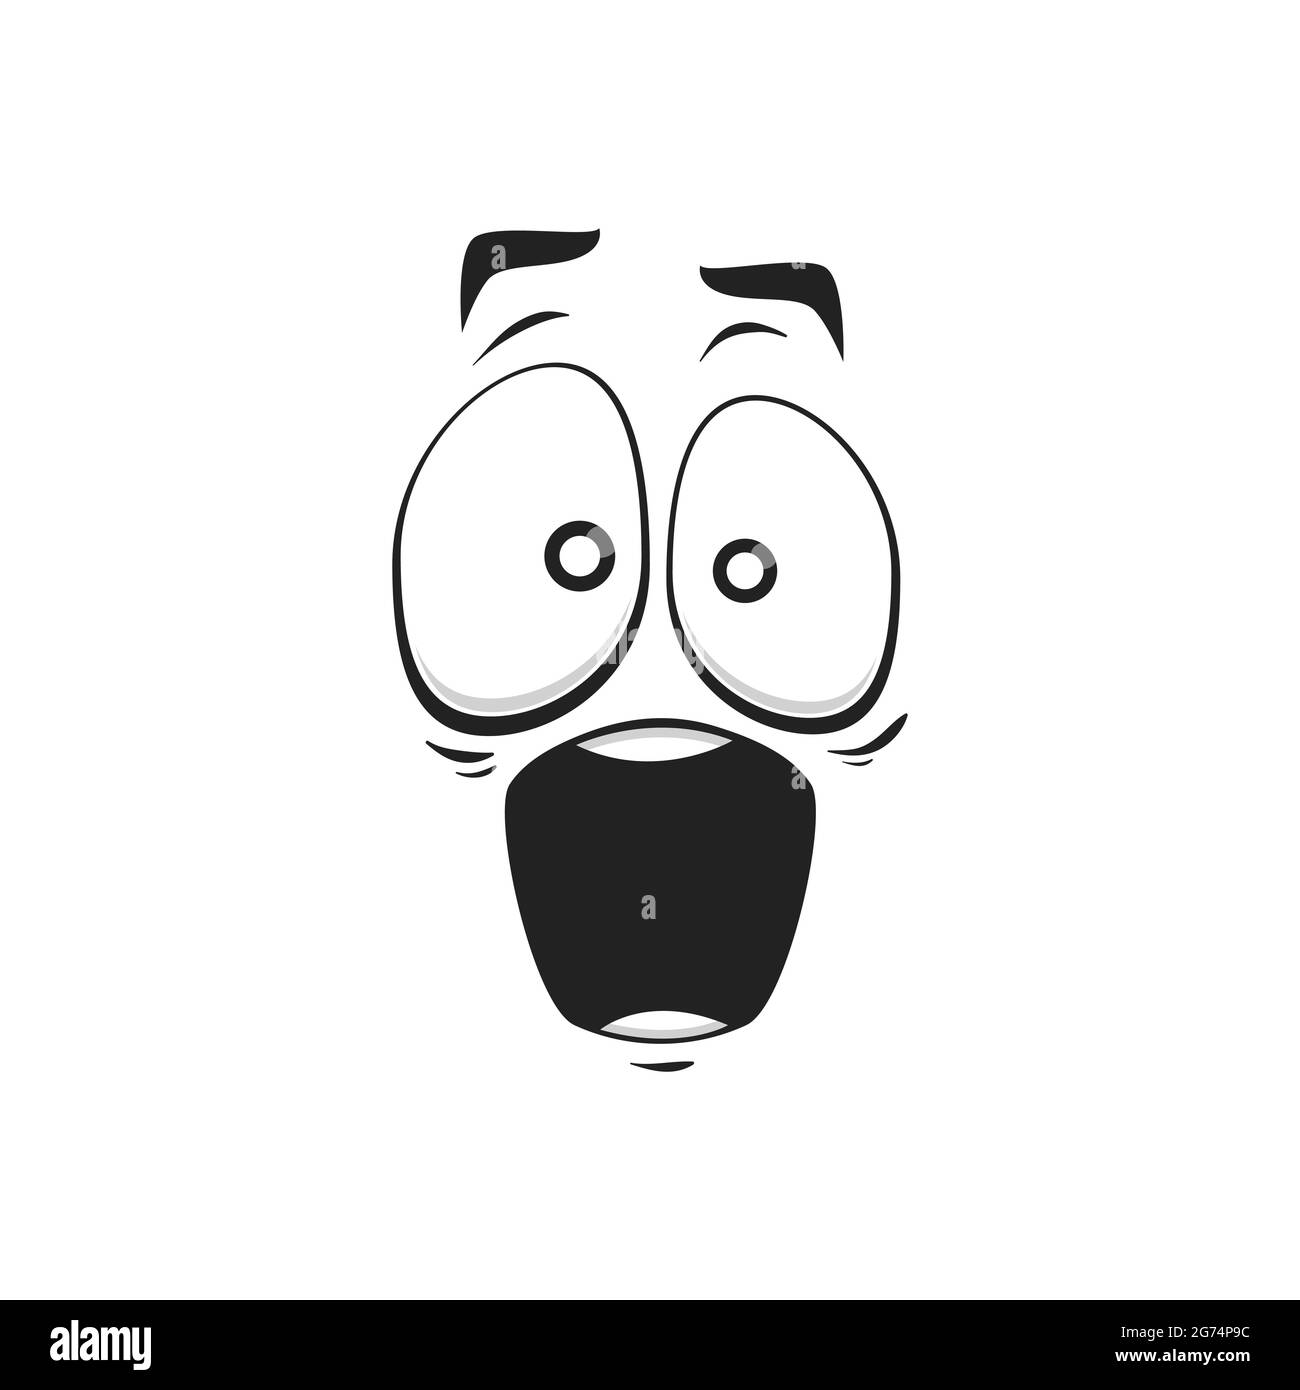 Cartoon face vector icon, surprised funny emoji, astonished facial expression with wide open or goggle eyes and open mouth, feelings isolated on white Stock Vector